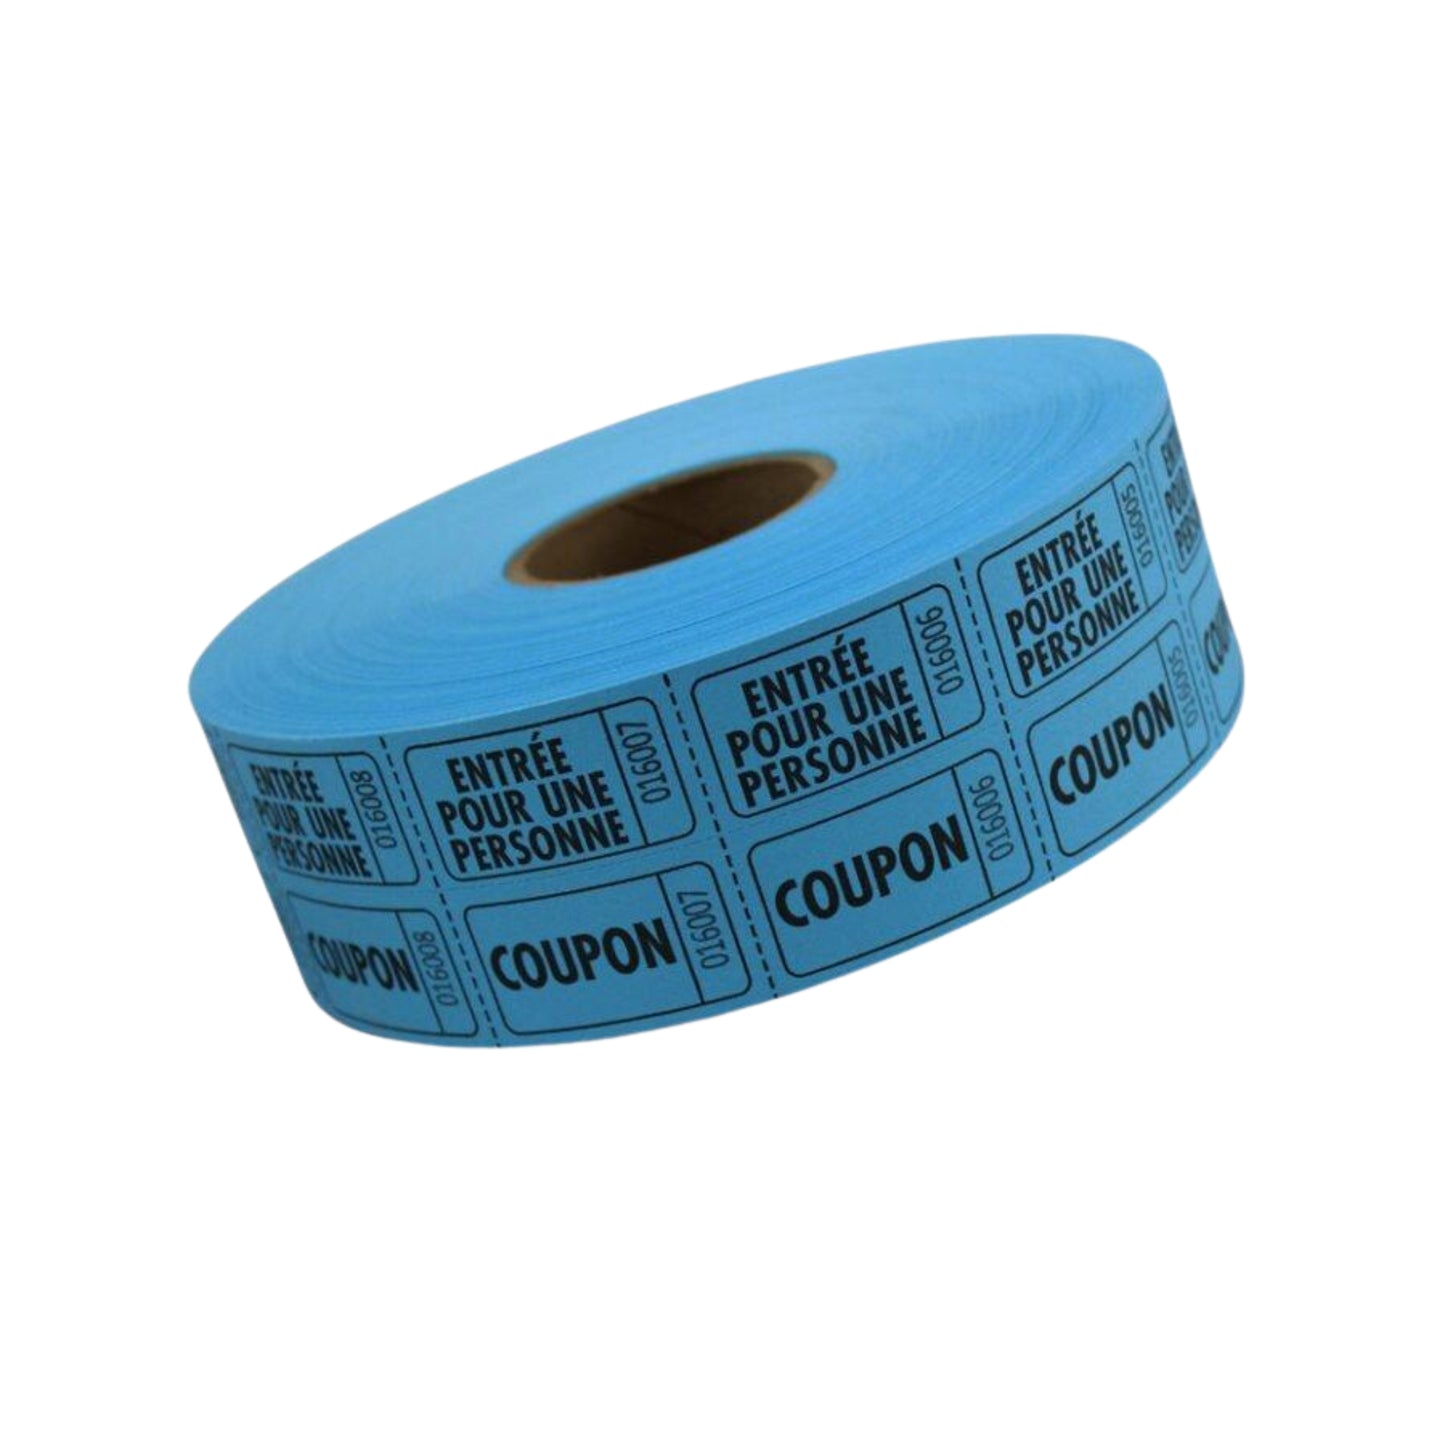 DOUBLE COUPONS 2 X 2 IN. 2000/ROLL - BLUE